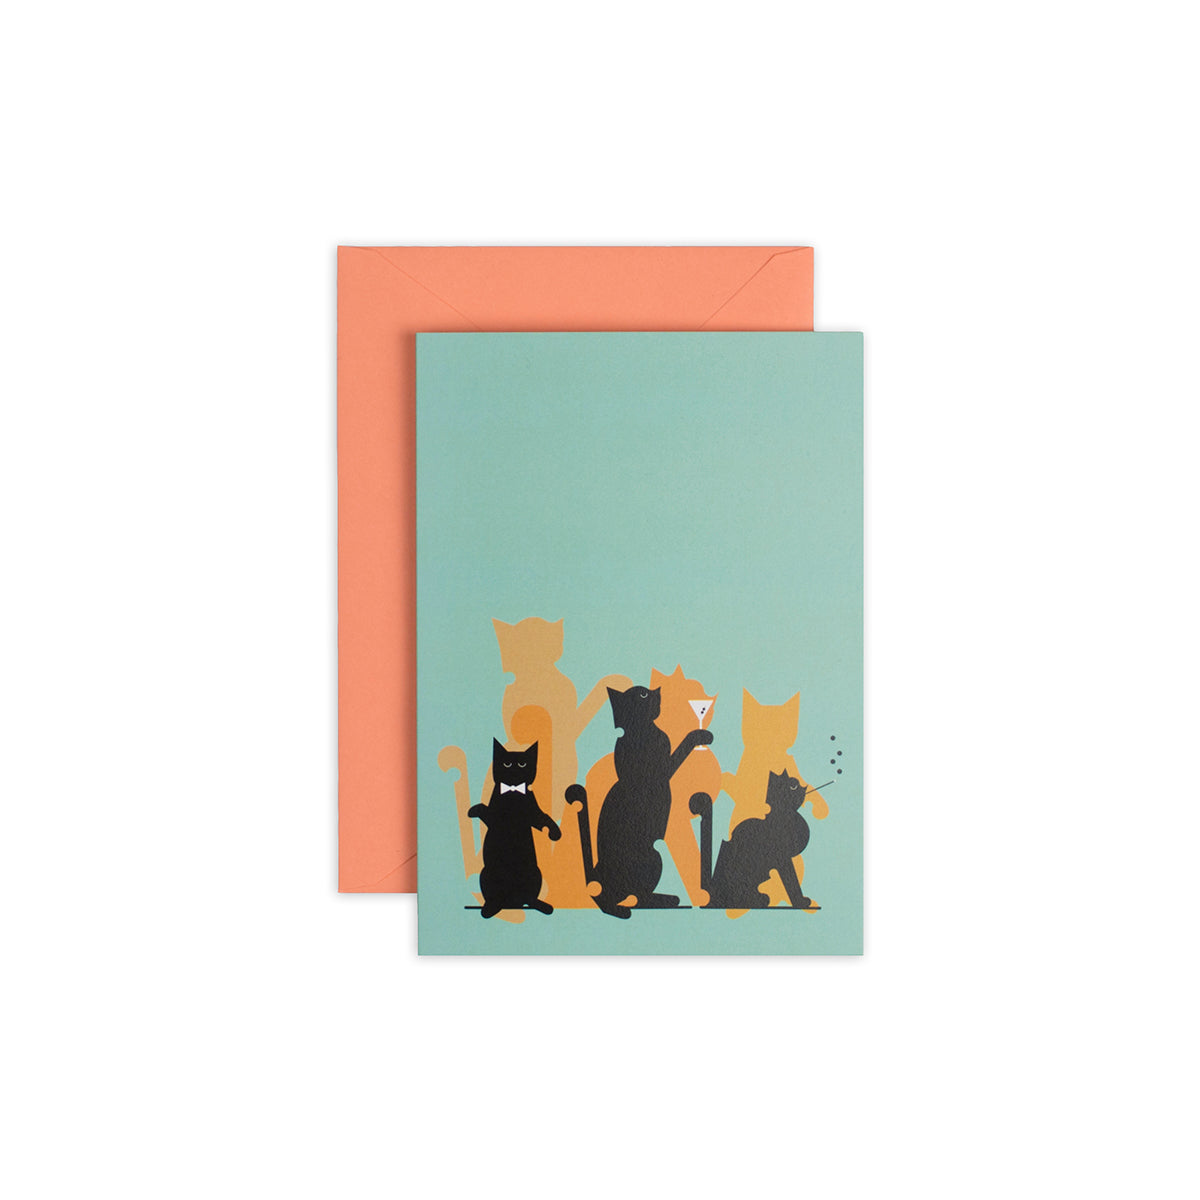 4 1/2" x 6 1/4" light blue greeting card featuring three silhouettes of cats in black and shades of orange